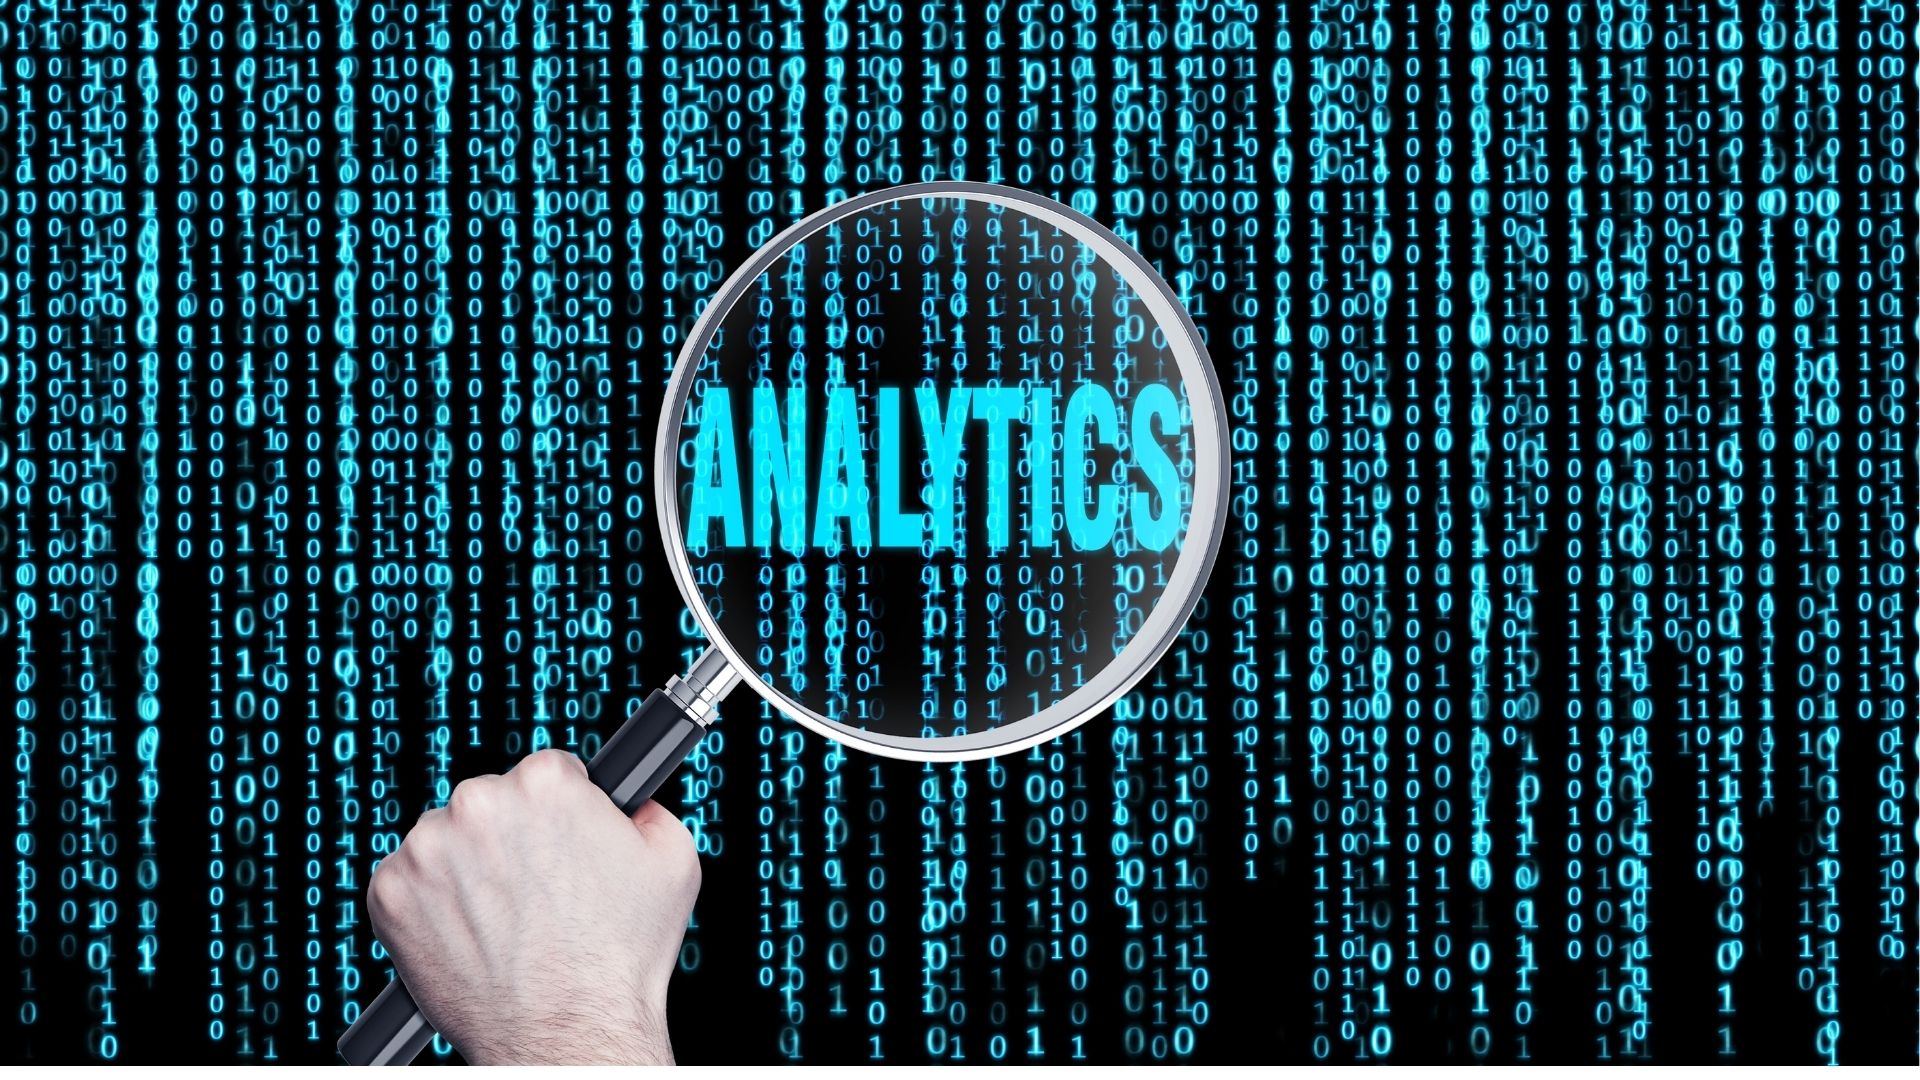 Blog The First Survey to Analyze Government Analytics